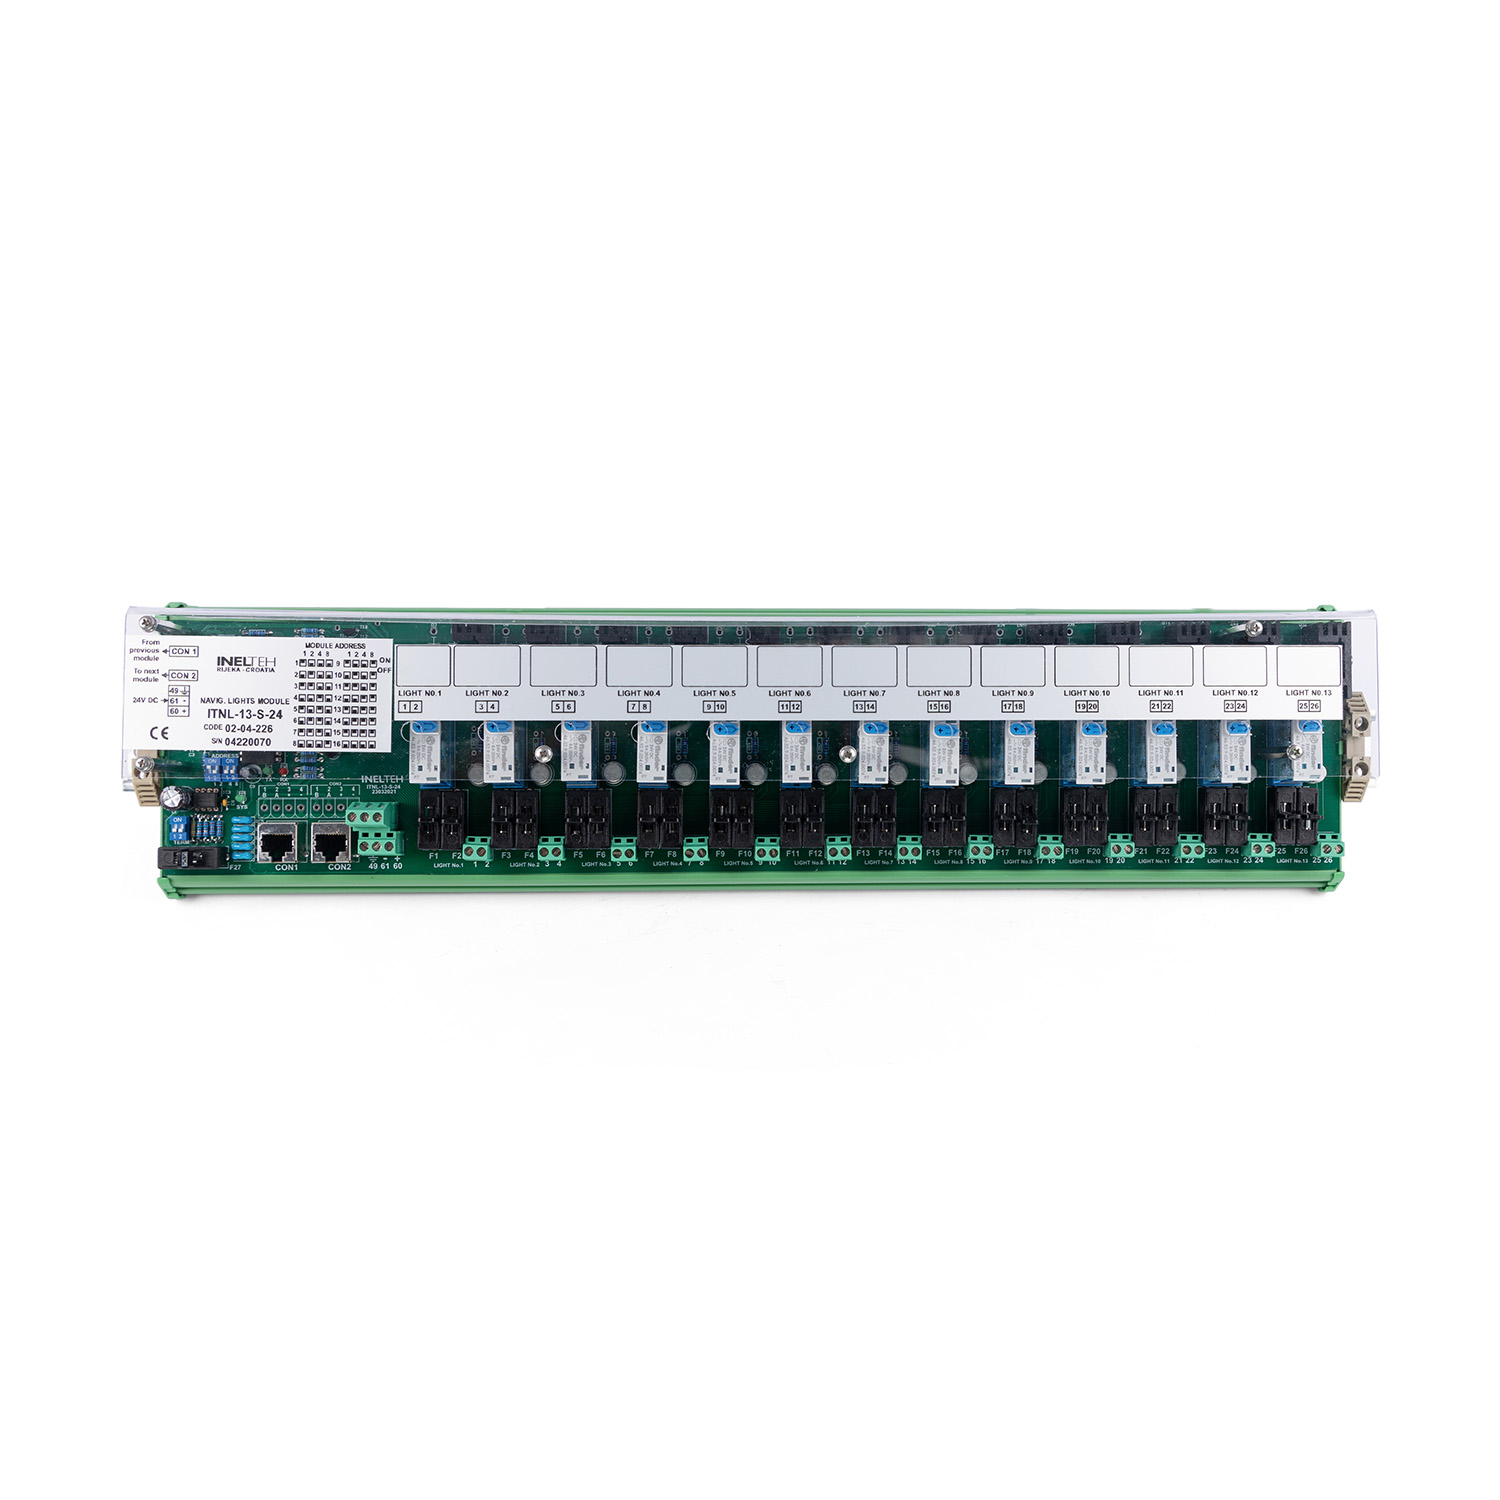 02-04-224 ITNL-13-S-230 Input module for max. 13 single navigation lights 230/115VAC, cable 1.5mtr.